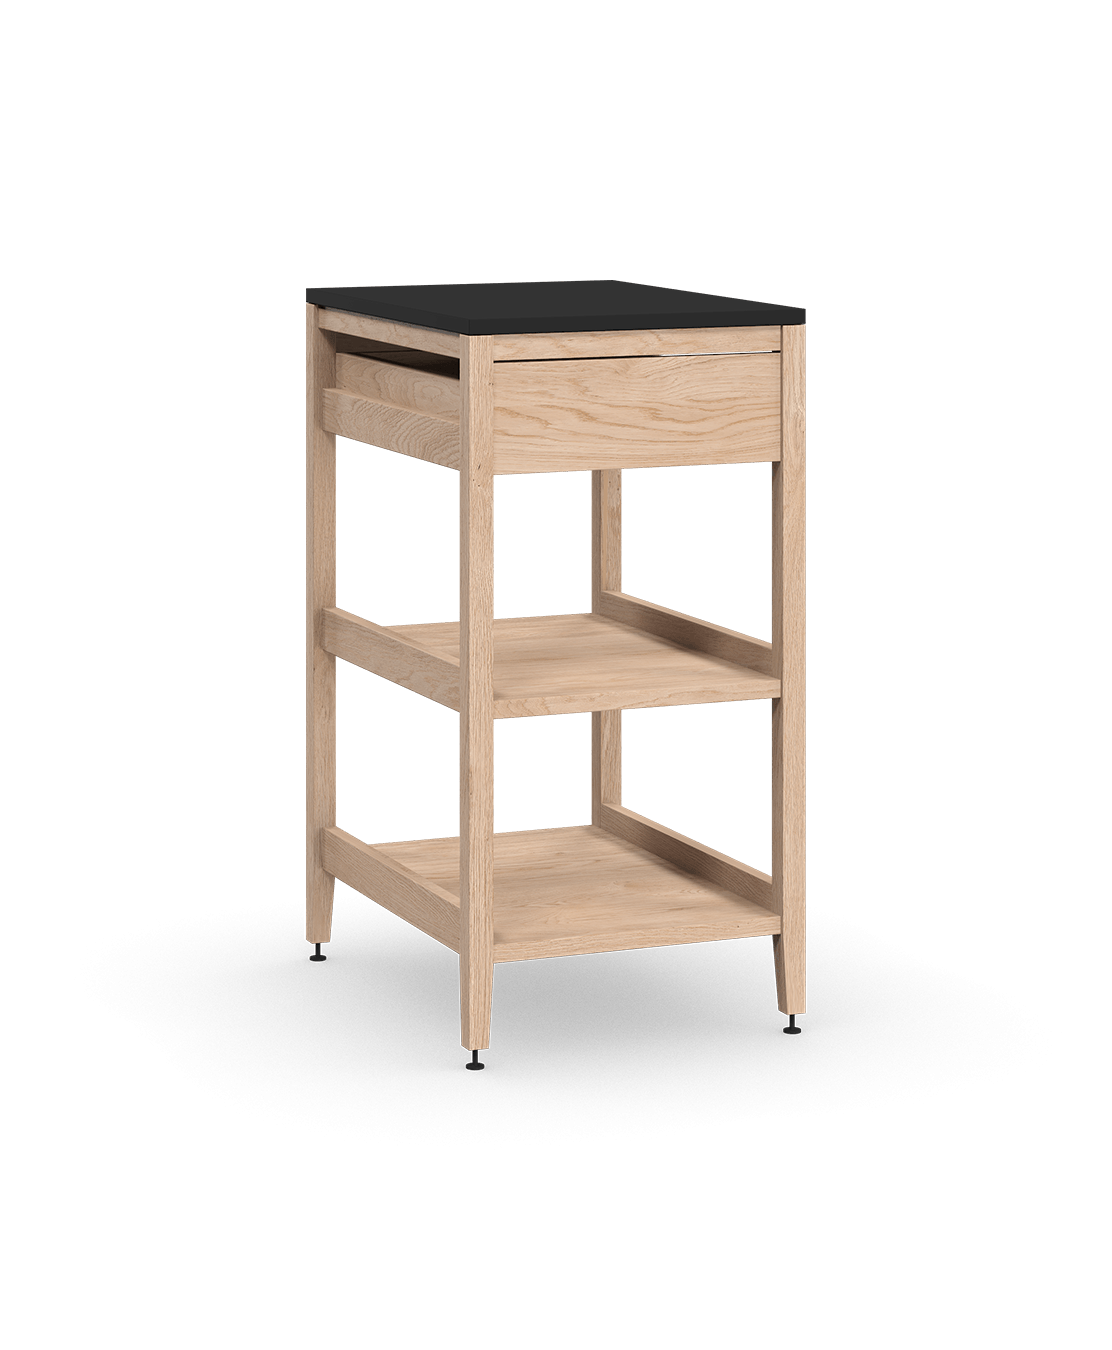 Coquo modular kitchen cabinet with one drawer and two shelves in natural oak.
